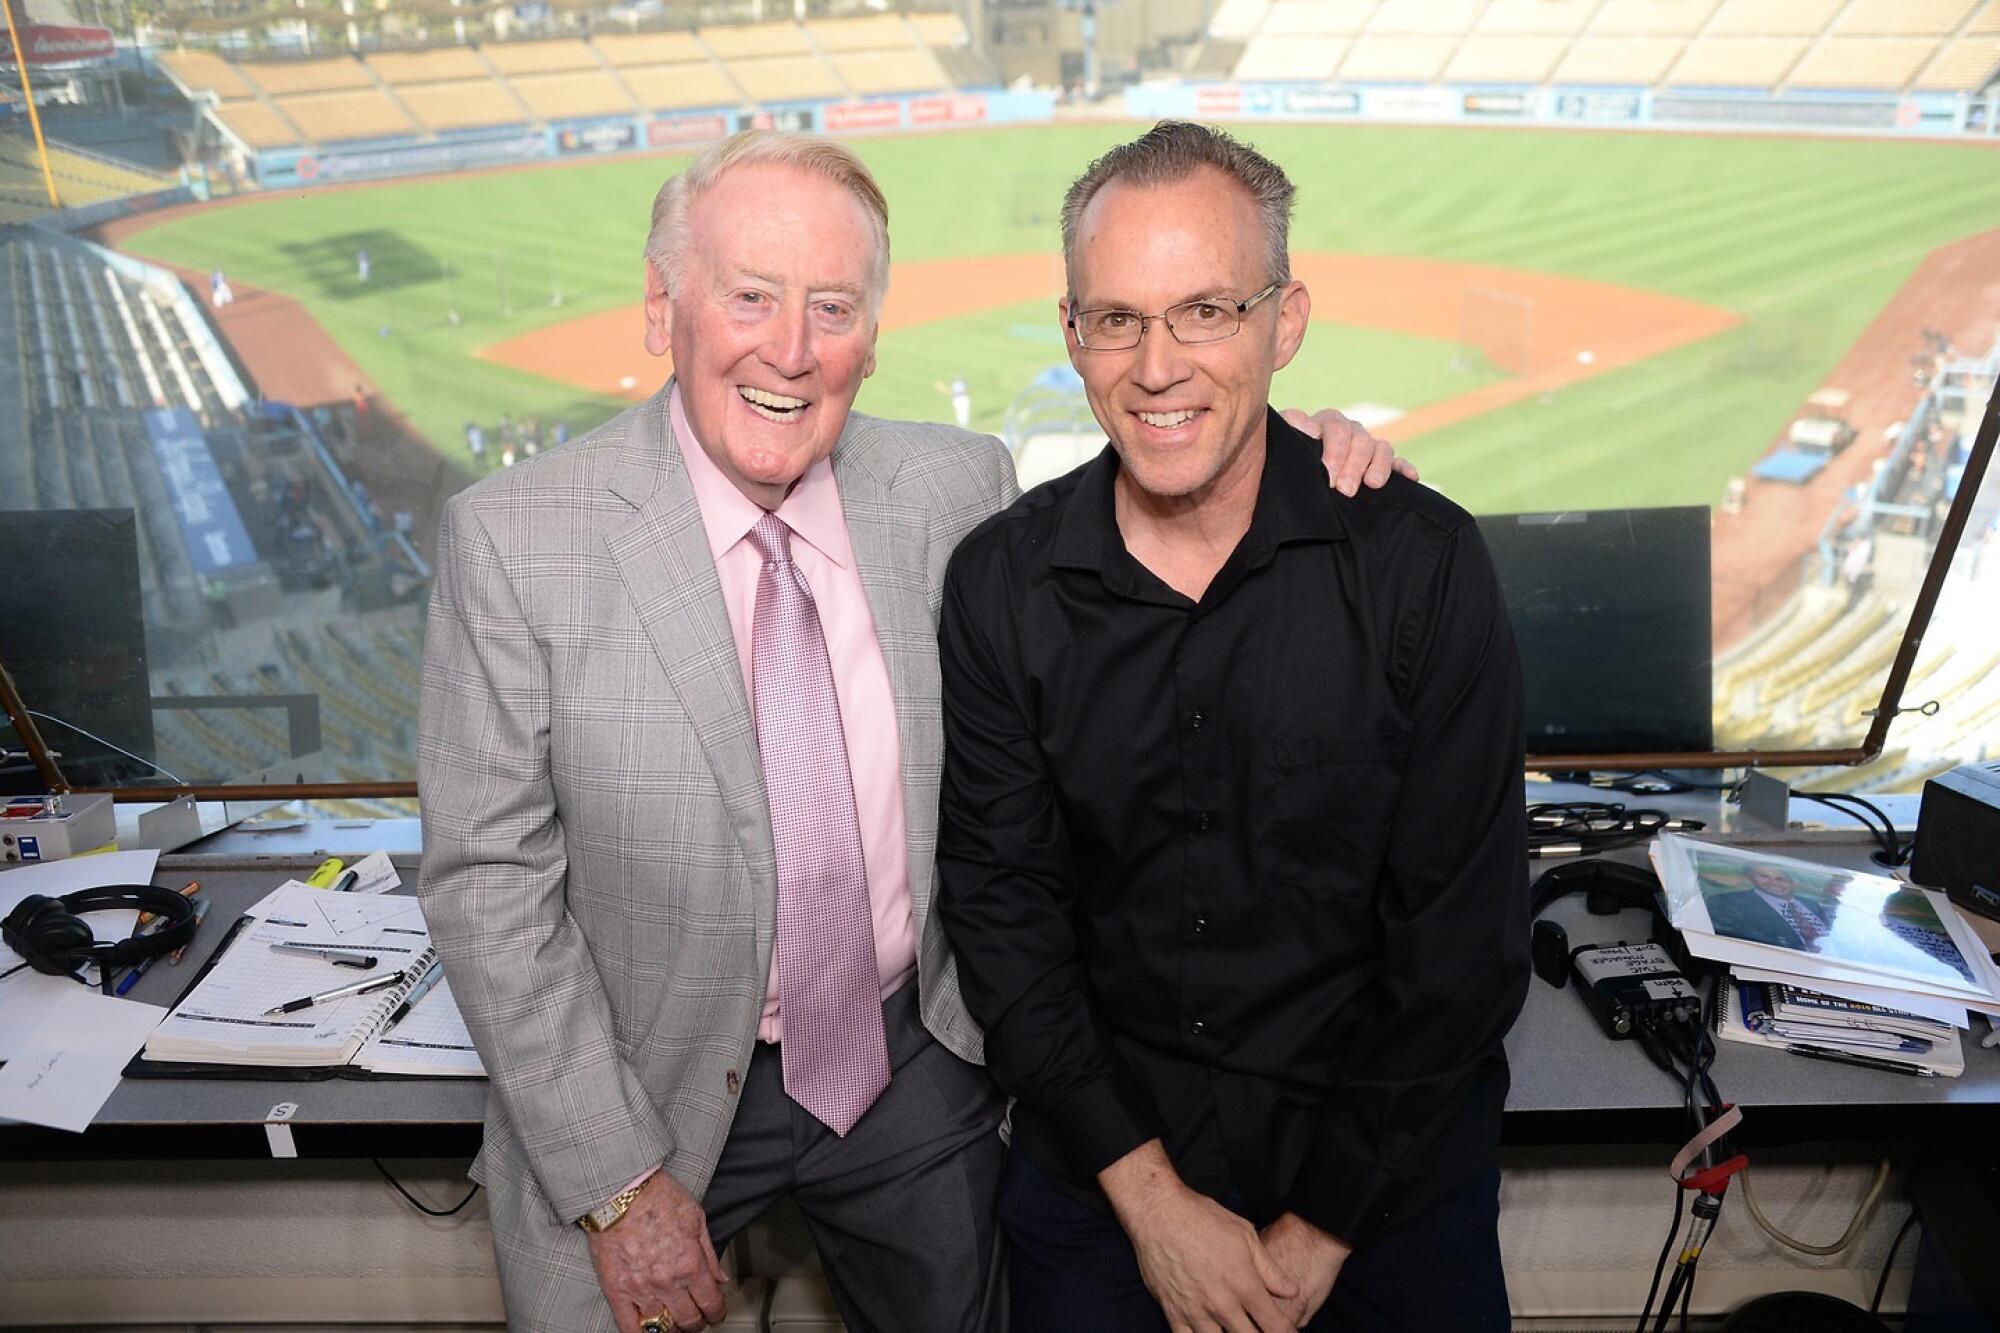 Legendary Dodgers broadcaster Vin Scully, left, and Dodgers historian Mark Langill pose for a photo together.